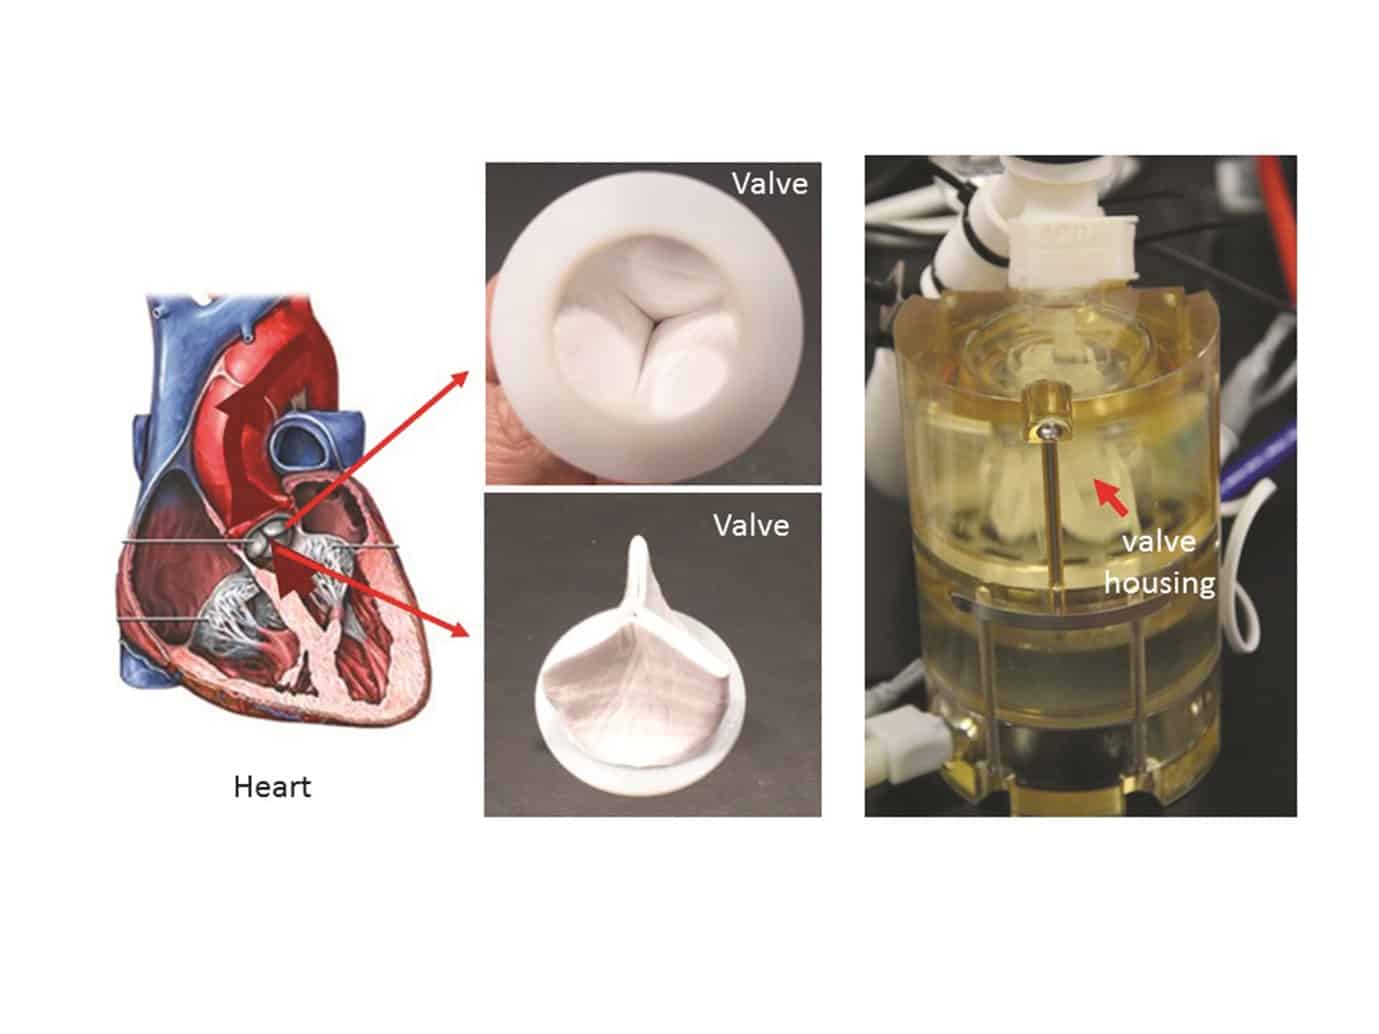 QU teams up with researchers to develop living heart valves